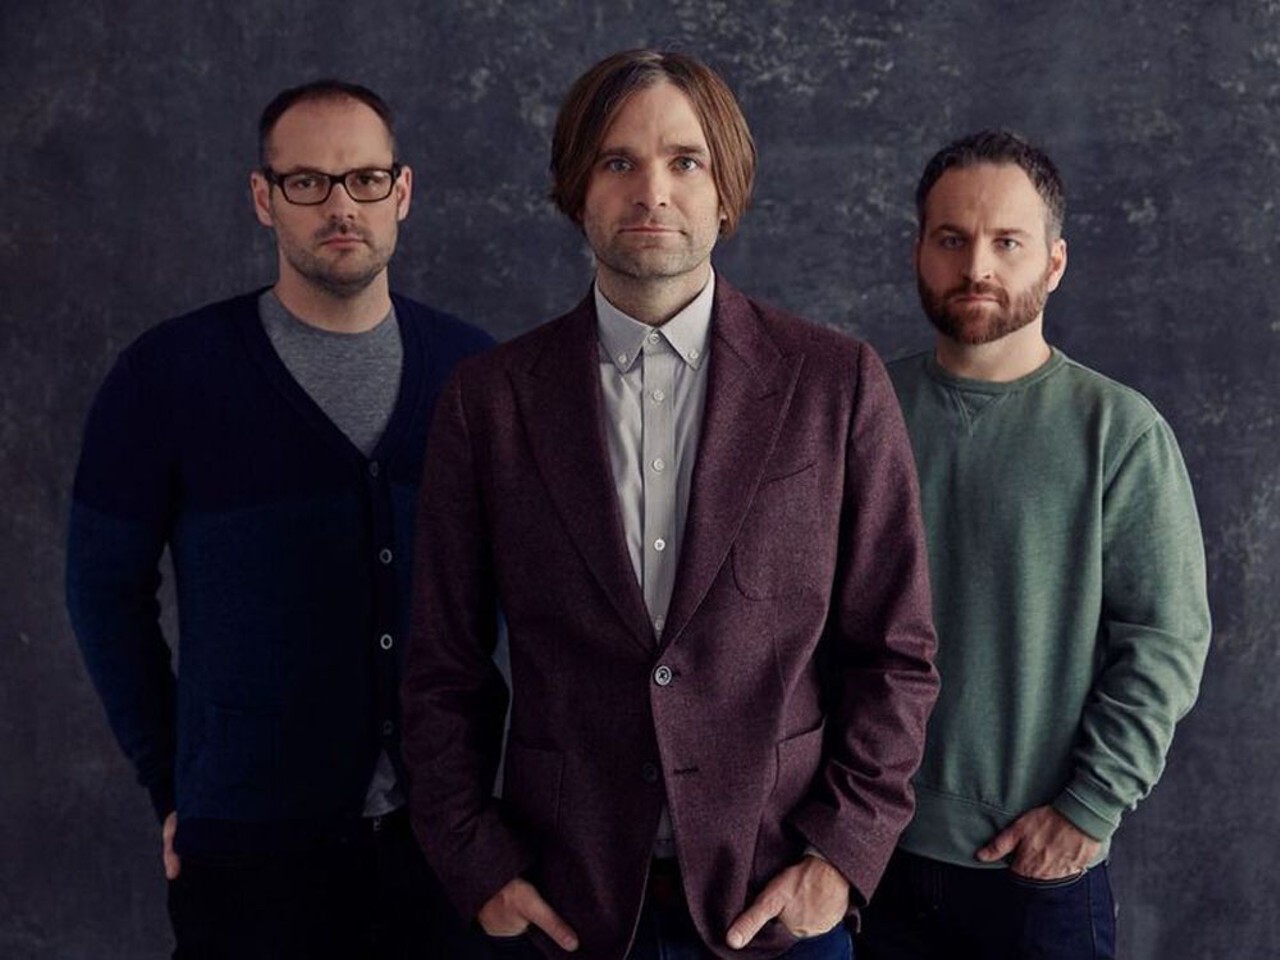 Death Cab for Cutie
The Pacific Northwest is well represented at this year&#146;s Riot Fest, and one of those bands happens to be indie rockers Death Cab for Cutie. After longtime guitarist Chris Walla left the band last year, Ben Gibbord and company are still chugging away at making music and touring. Expect some new songs from last year&#146;s Kintsugi as well as favorite songs like &#147;I Will Follow You Into the Dark&#148; and &#147;Transatlanticism.&#148; Saturday @ 7:15 p.m., Roots Stage